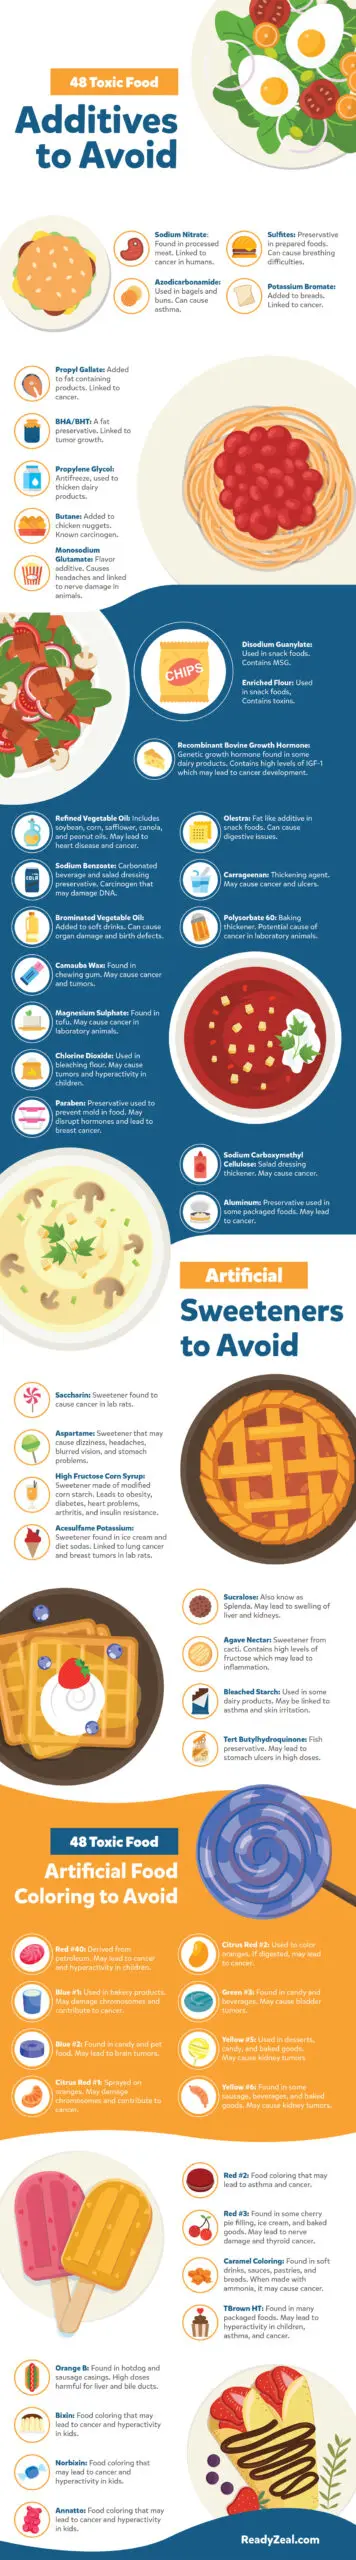 48 Toxic Food: Additives to Avoid infographic